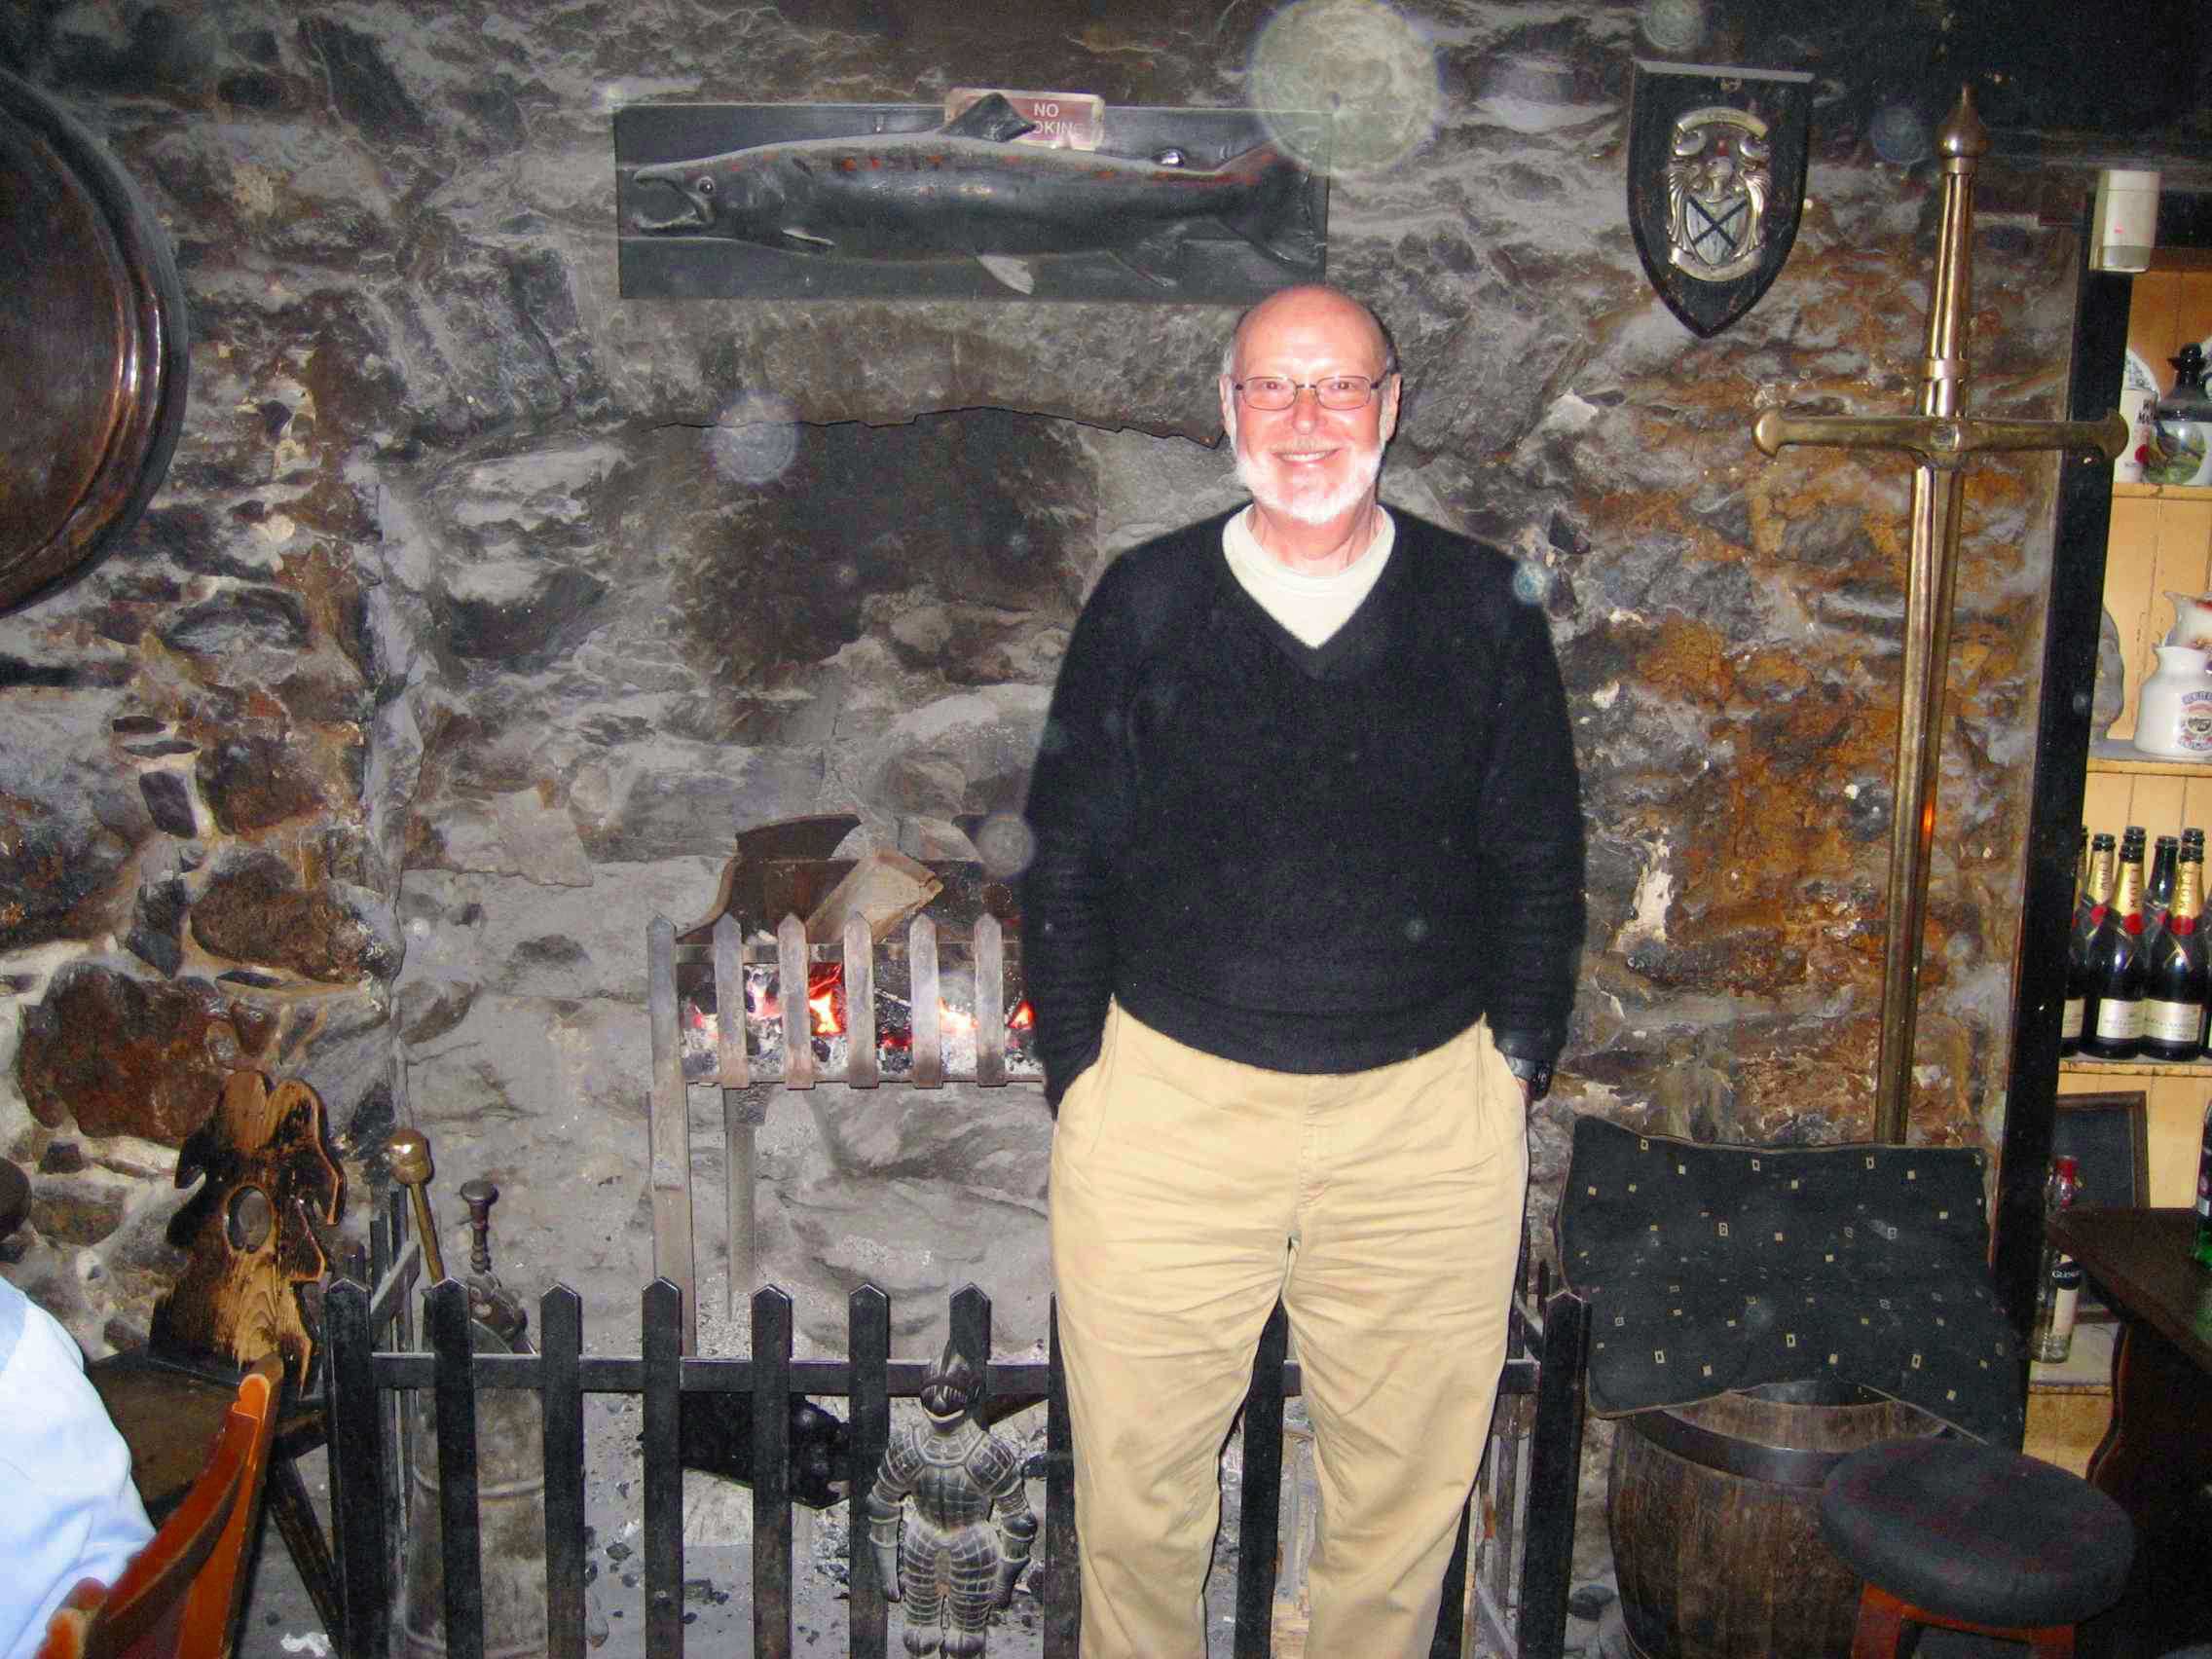 DS21 Author in Drover's Inn